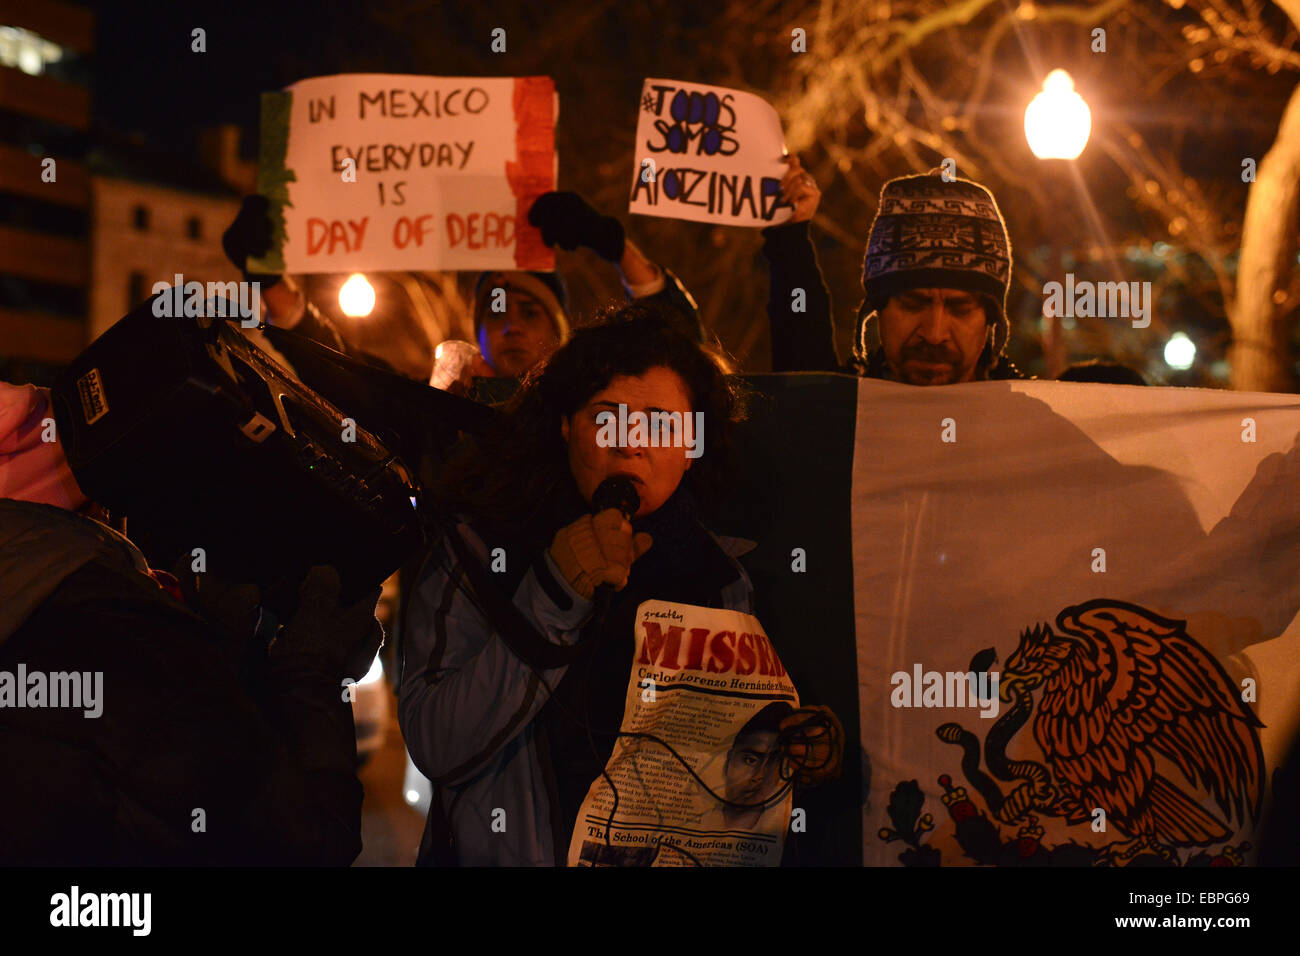 Washington DC, USA. 3rd December, 2014. Protesters rallied in Washington, DC and dozens of other U.S. cities including Ferguson, MO Wednesday night demanding justice for 42 missing Mexican students who disappeared after police opened fire on them in Guerrero state in September. A group called USTired2# organized the protests to call for an end to U.S. aid to Mexican security forces, whom they consider complicit in the disappearance of the students. Later, the group joined a march against Staten Island grand jury verdict in the case of Eric Garner. Credit:  ZUMA Press, Inc./Alamy Live News Stock Photo